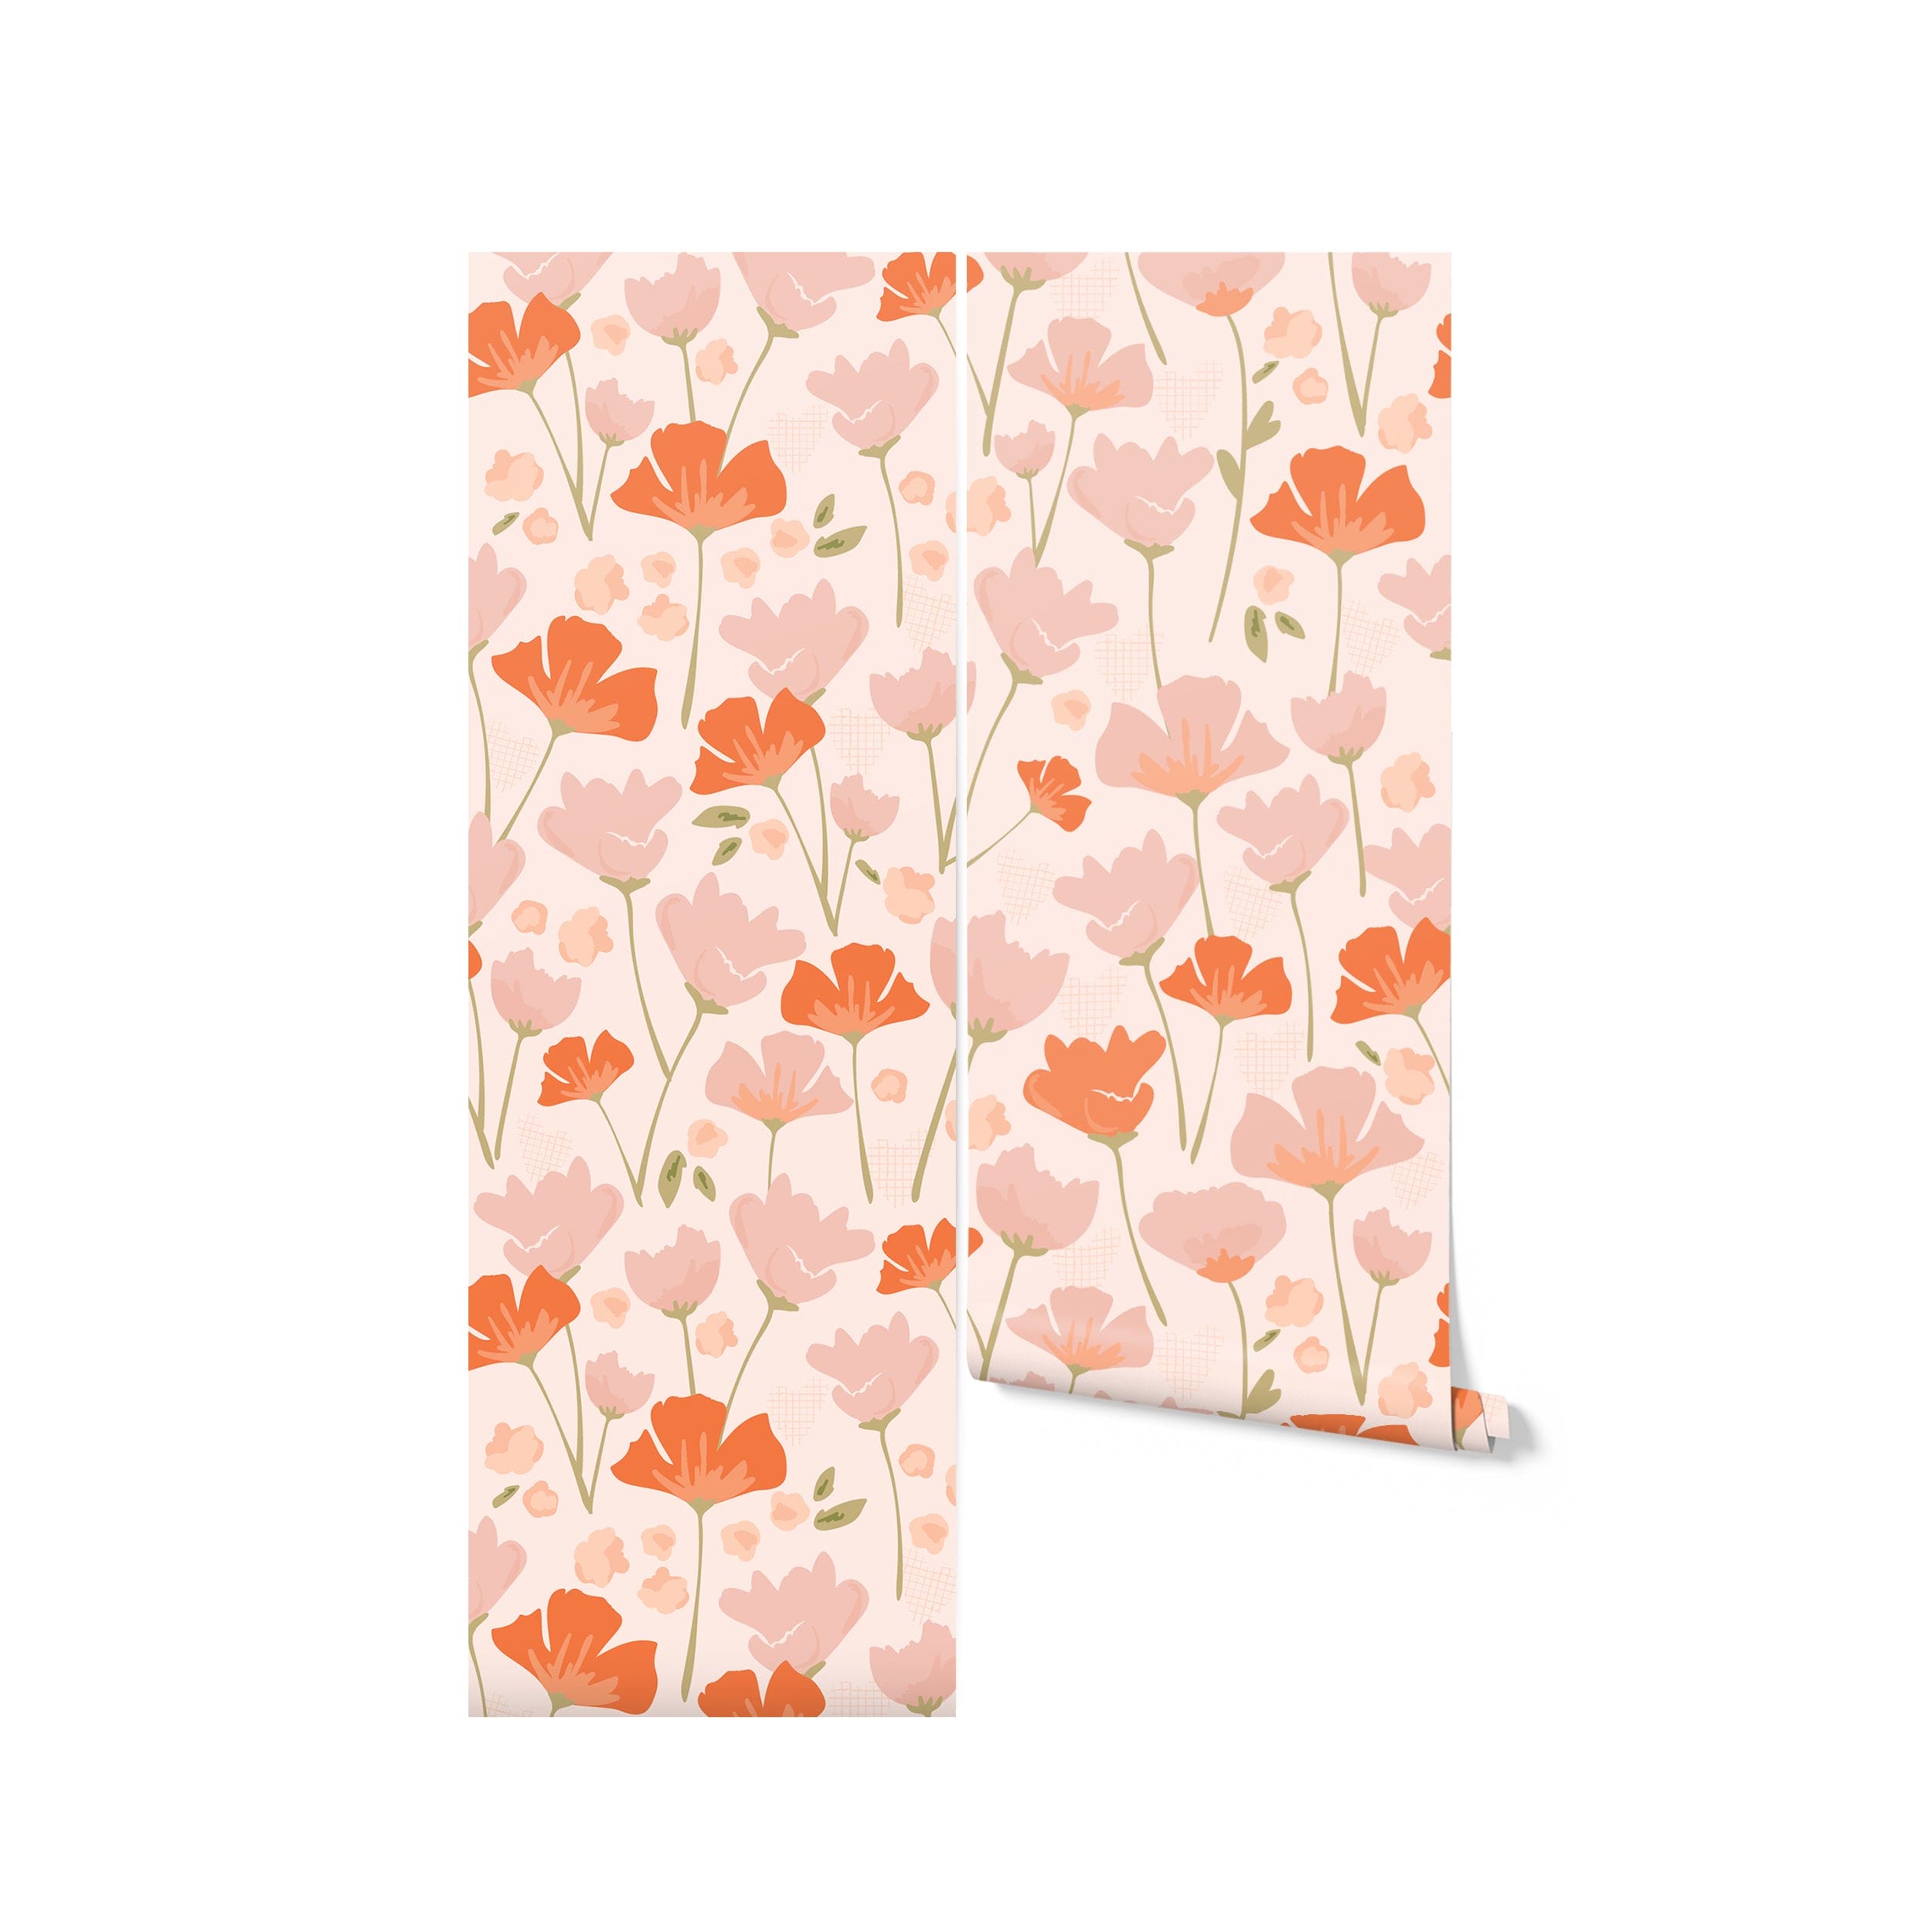 Product shot of a roll of 'Floral Love Wallpaper,' depicting a beautiful array of coral and pink flowers, perfect for transforming a room into a bright and cheerful retreat.